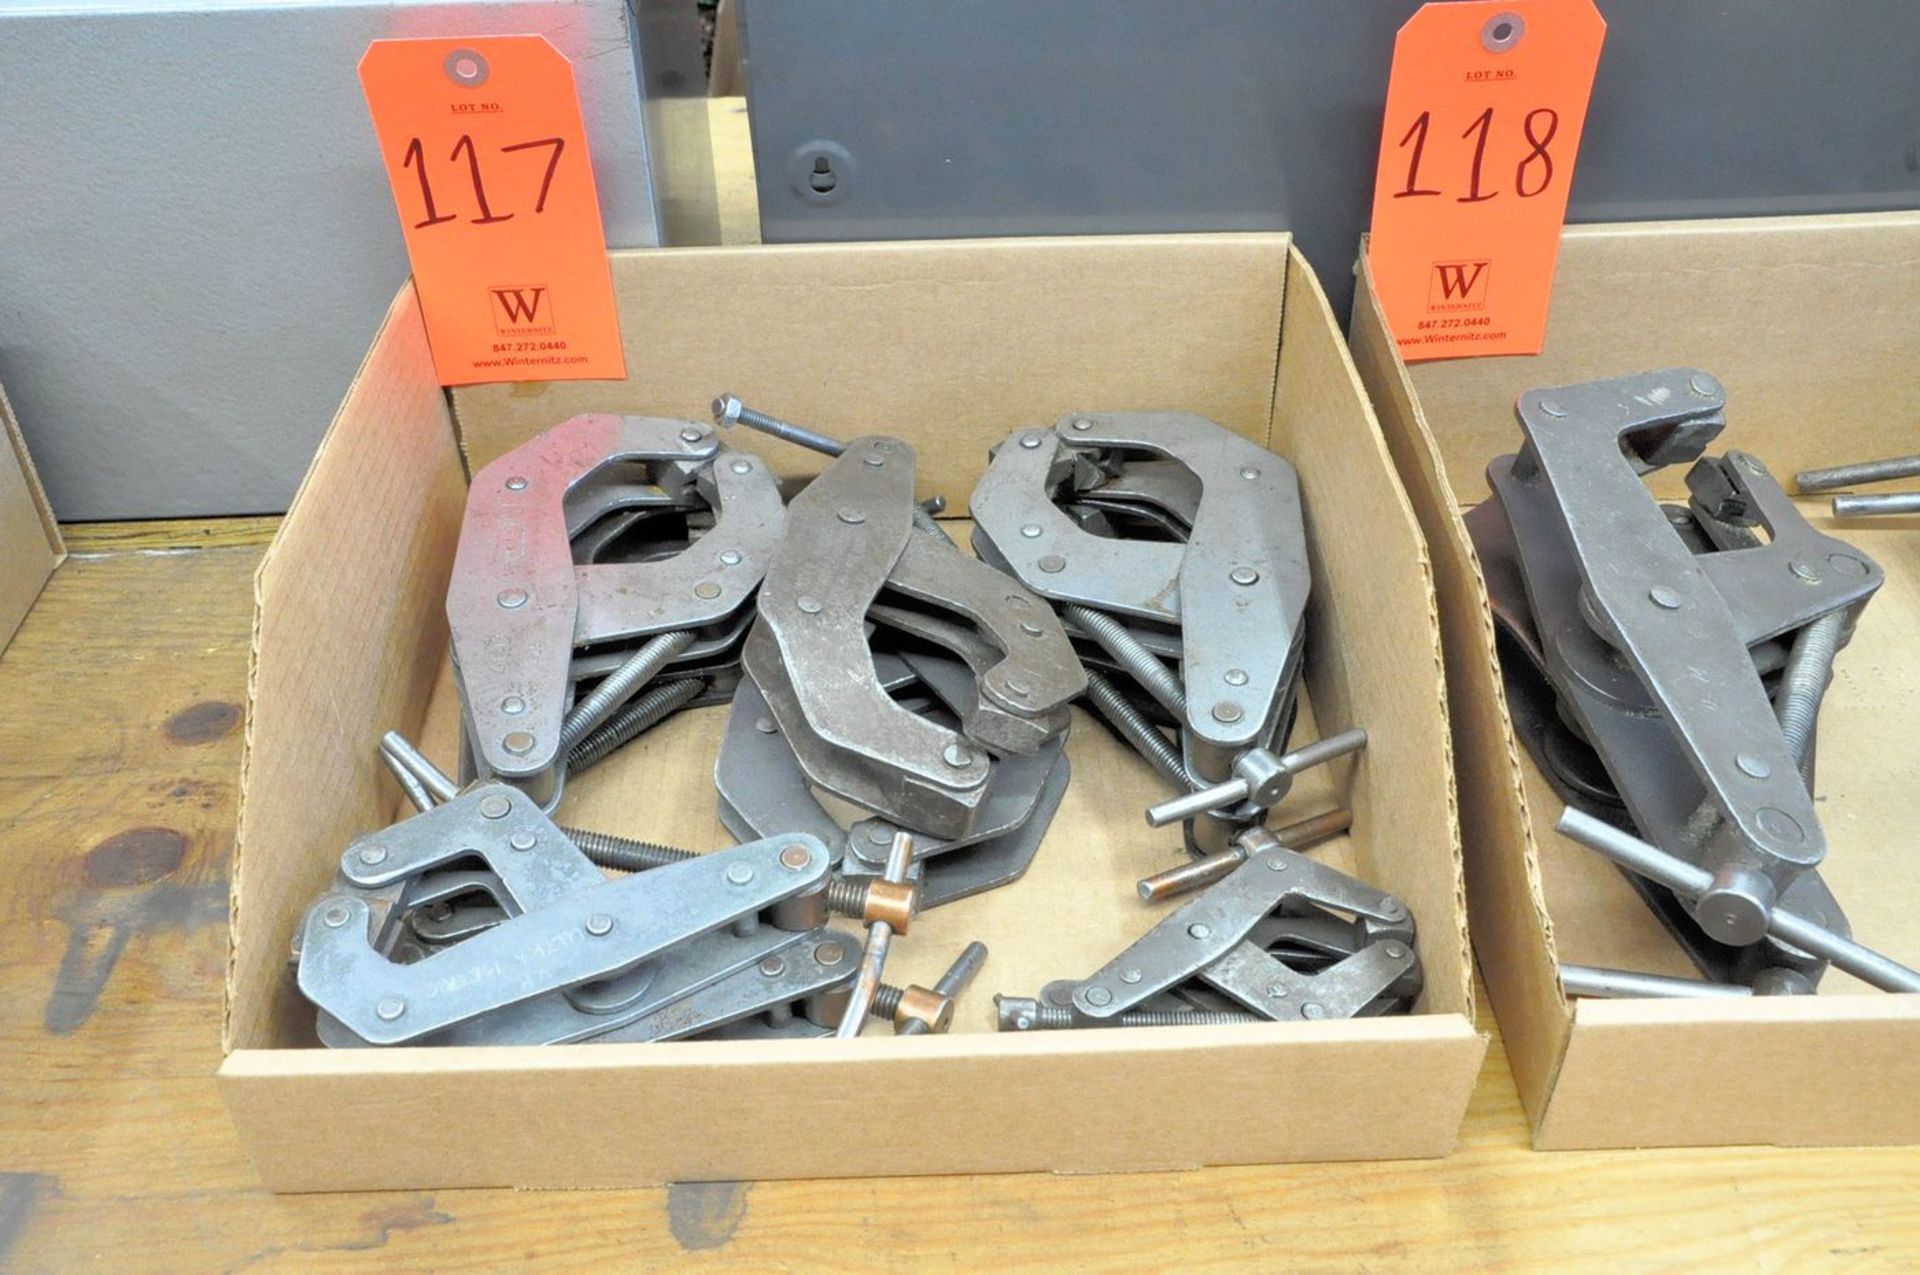 Lot - (6) Kant Twist Model 415 4-1/2", (2) Kant Twist Model 410 3" and (2) 5M 2" Cantilever Clamps